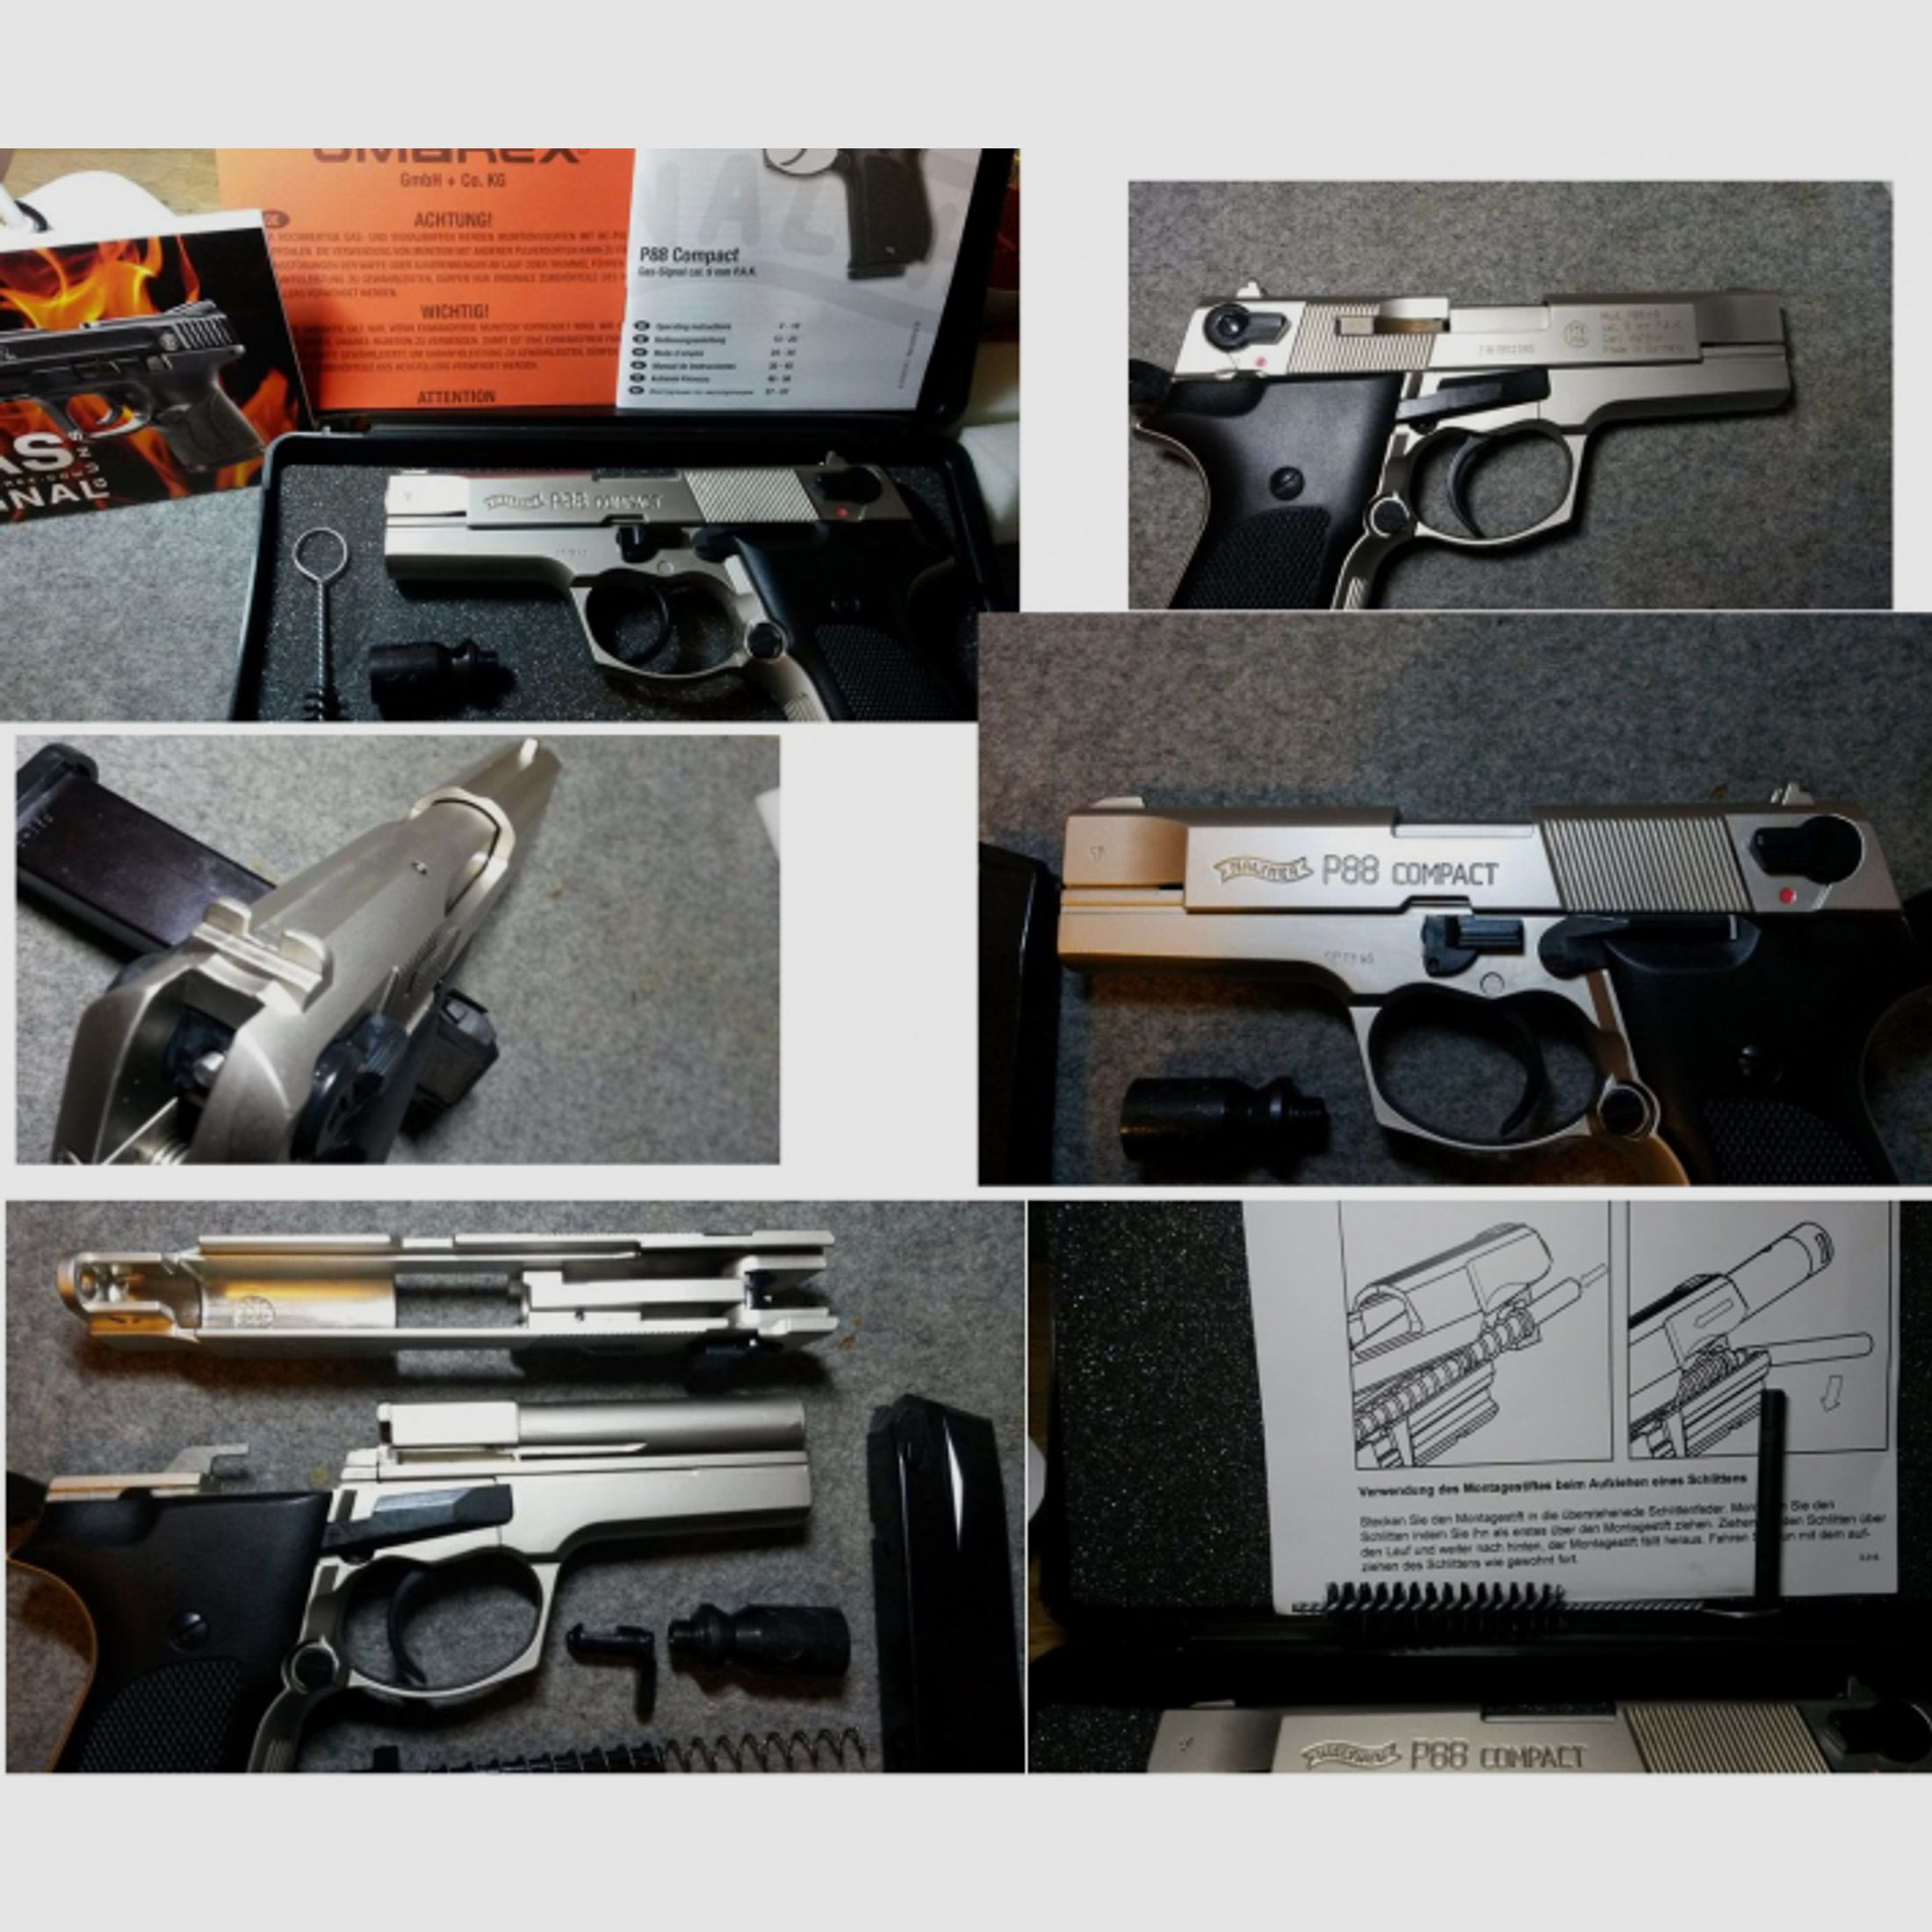 P 88 Walther P88 Compact nickel 9 mm P.A.K, komplett in der OVP ....plus Munition